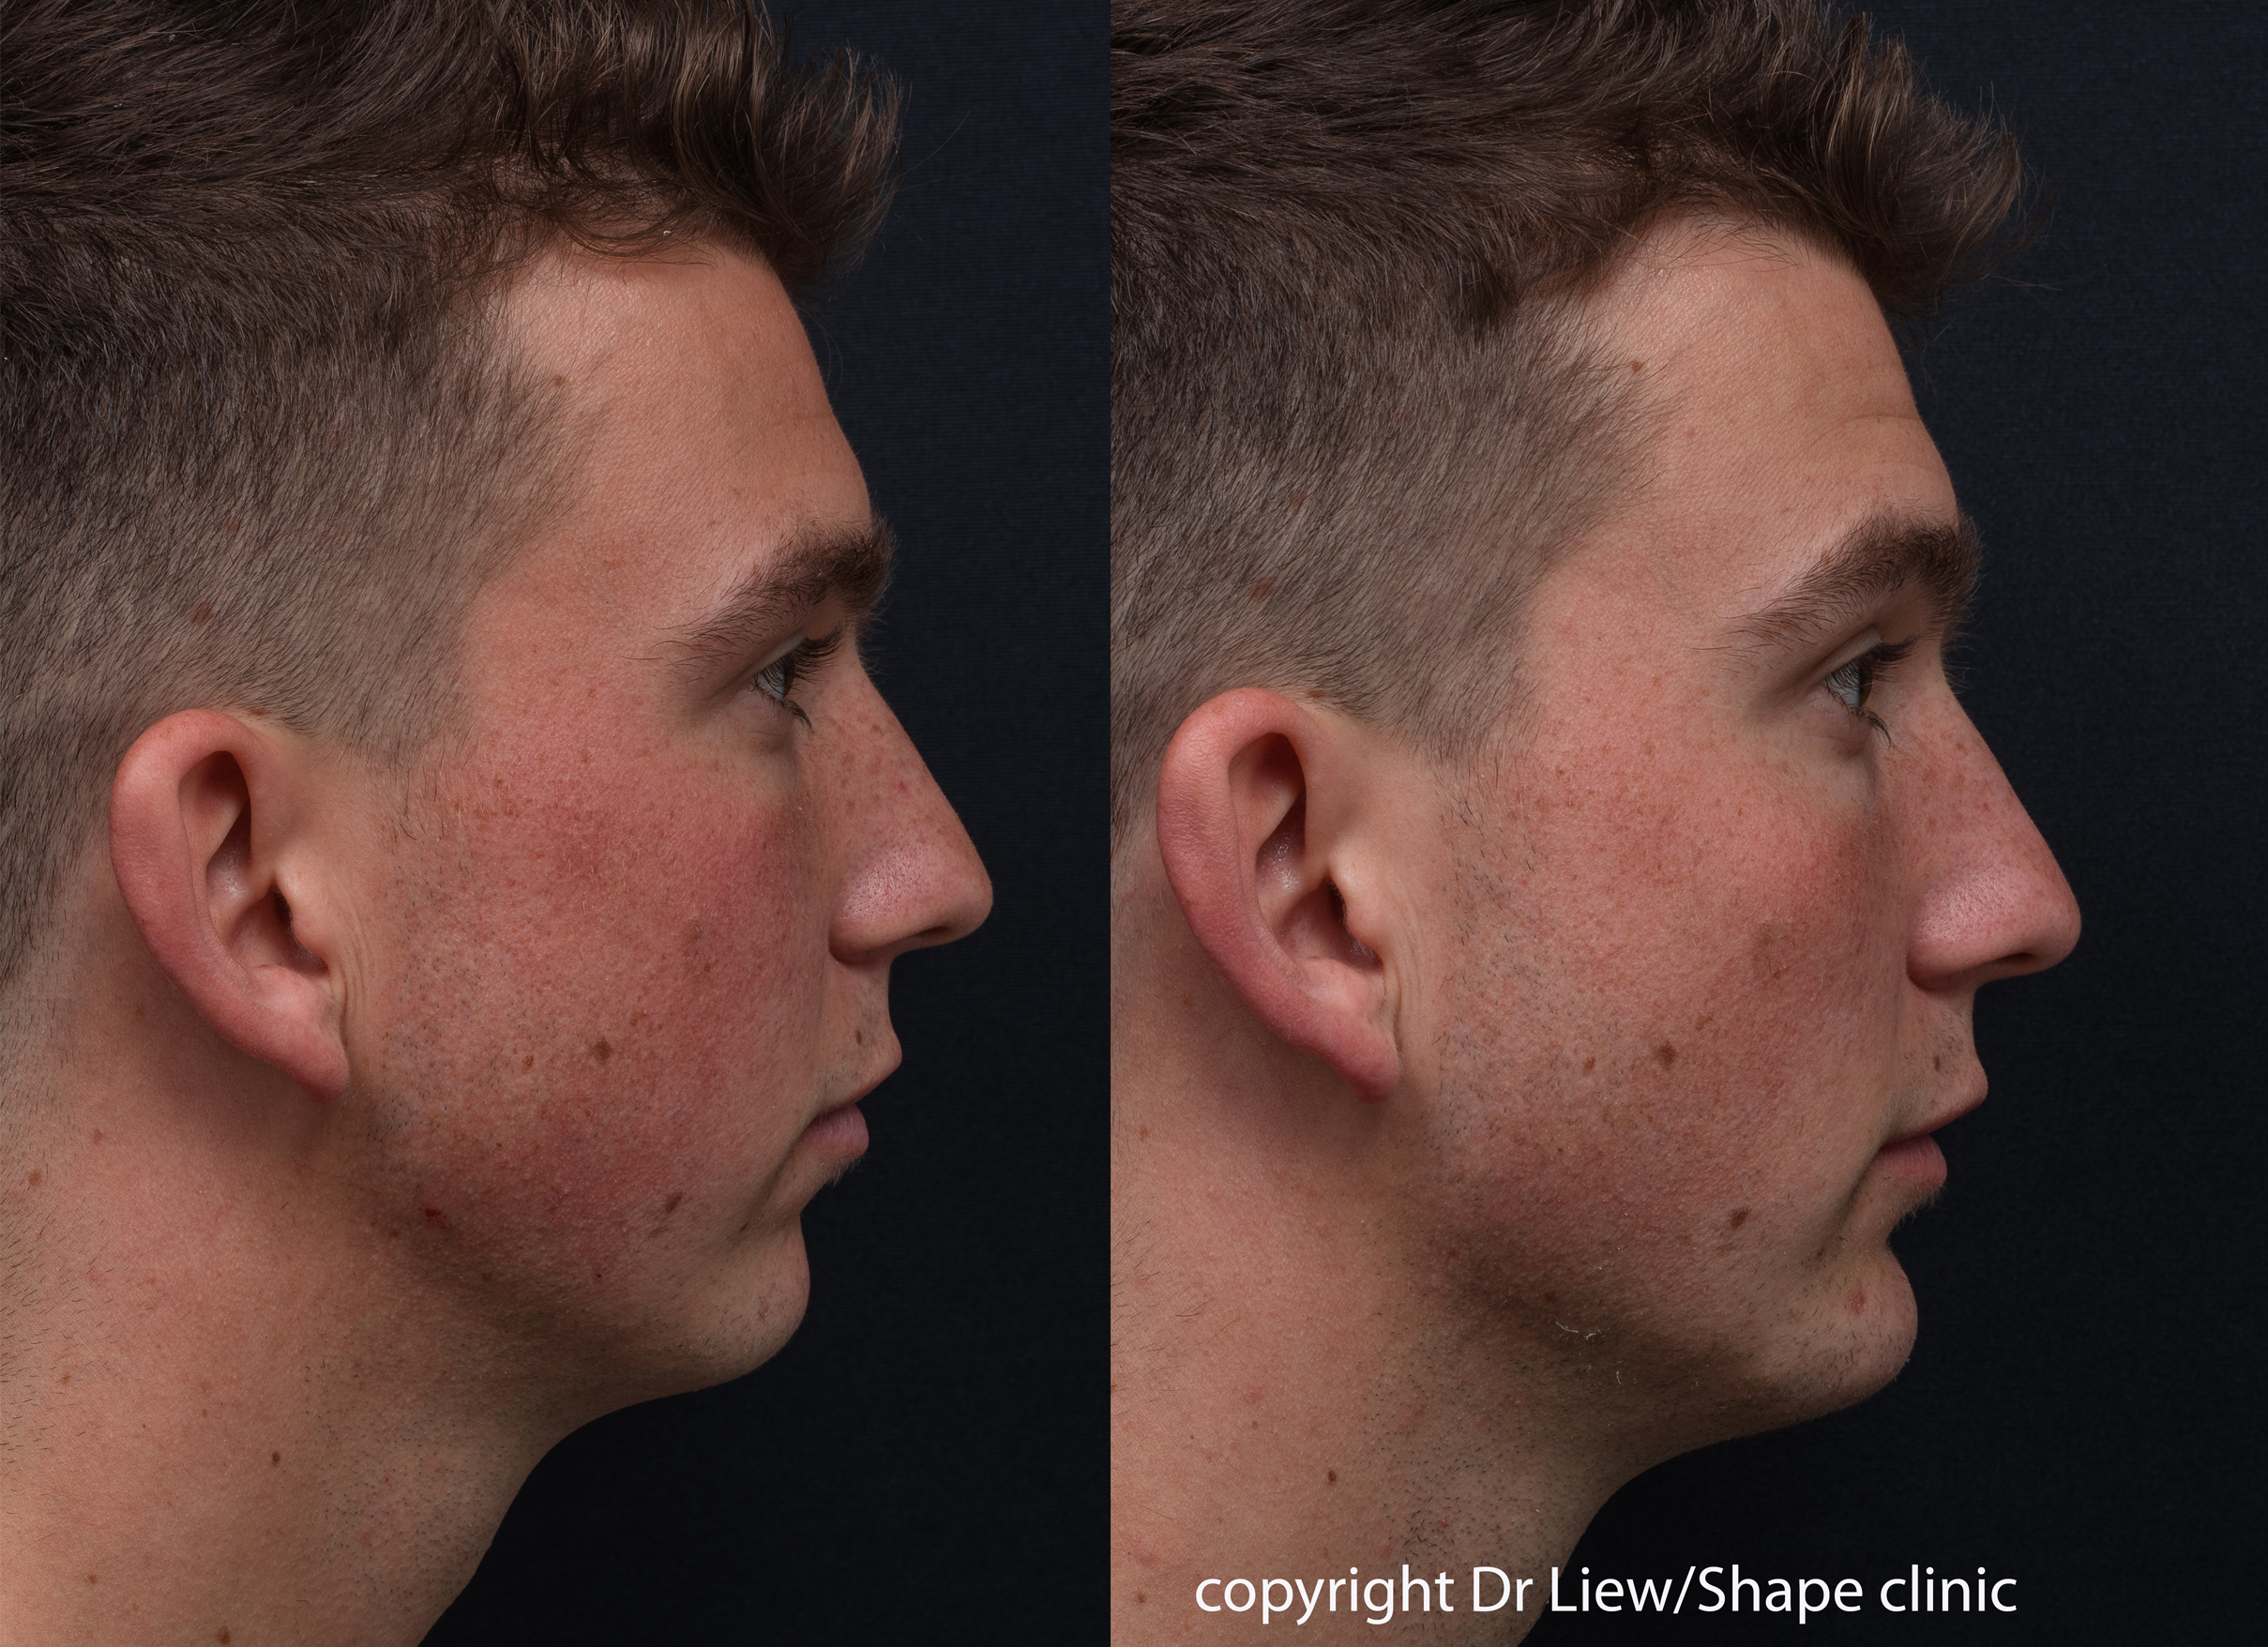 Before and after dermal filler treatment in the chin